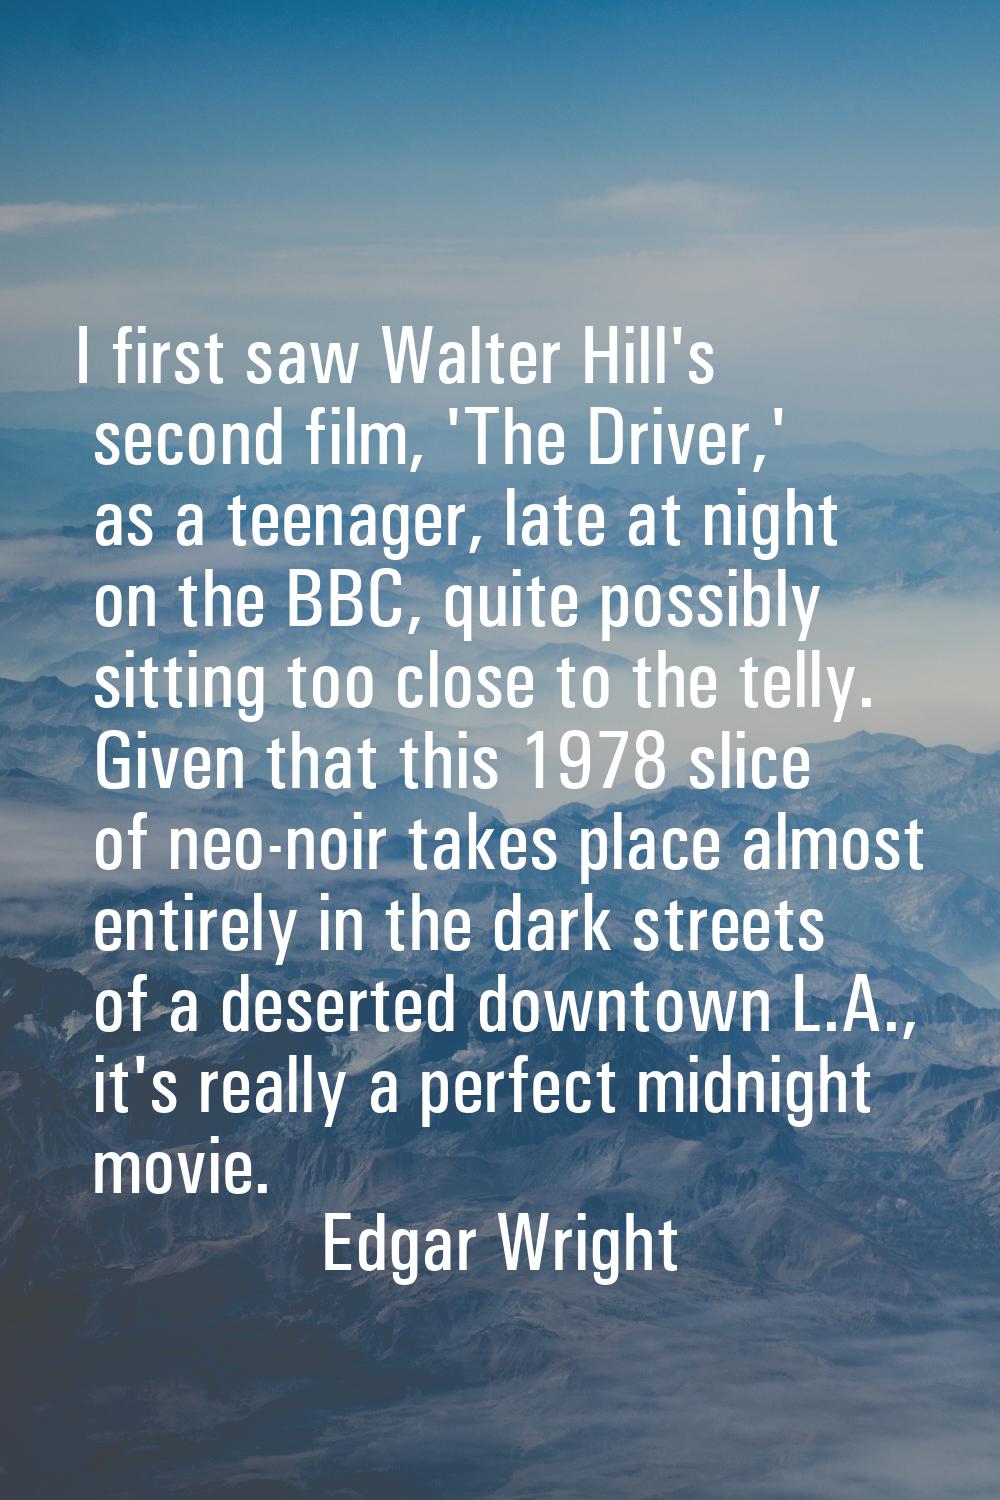 I first saw Walter Hill's second film, 'The Driver,' as a teenager, late at night on the BBC, quite